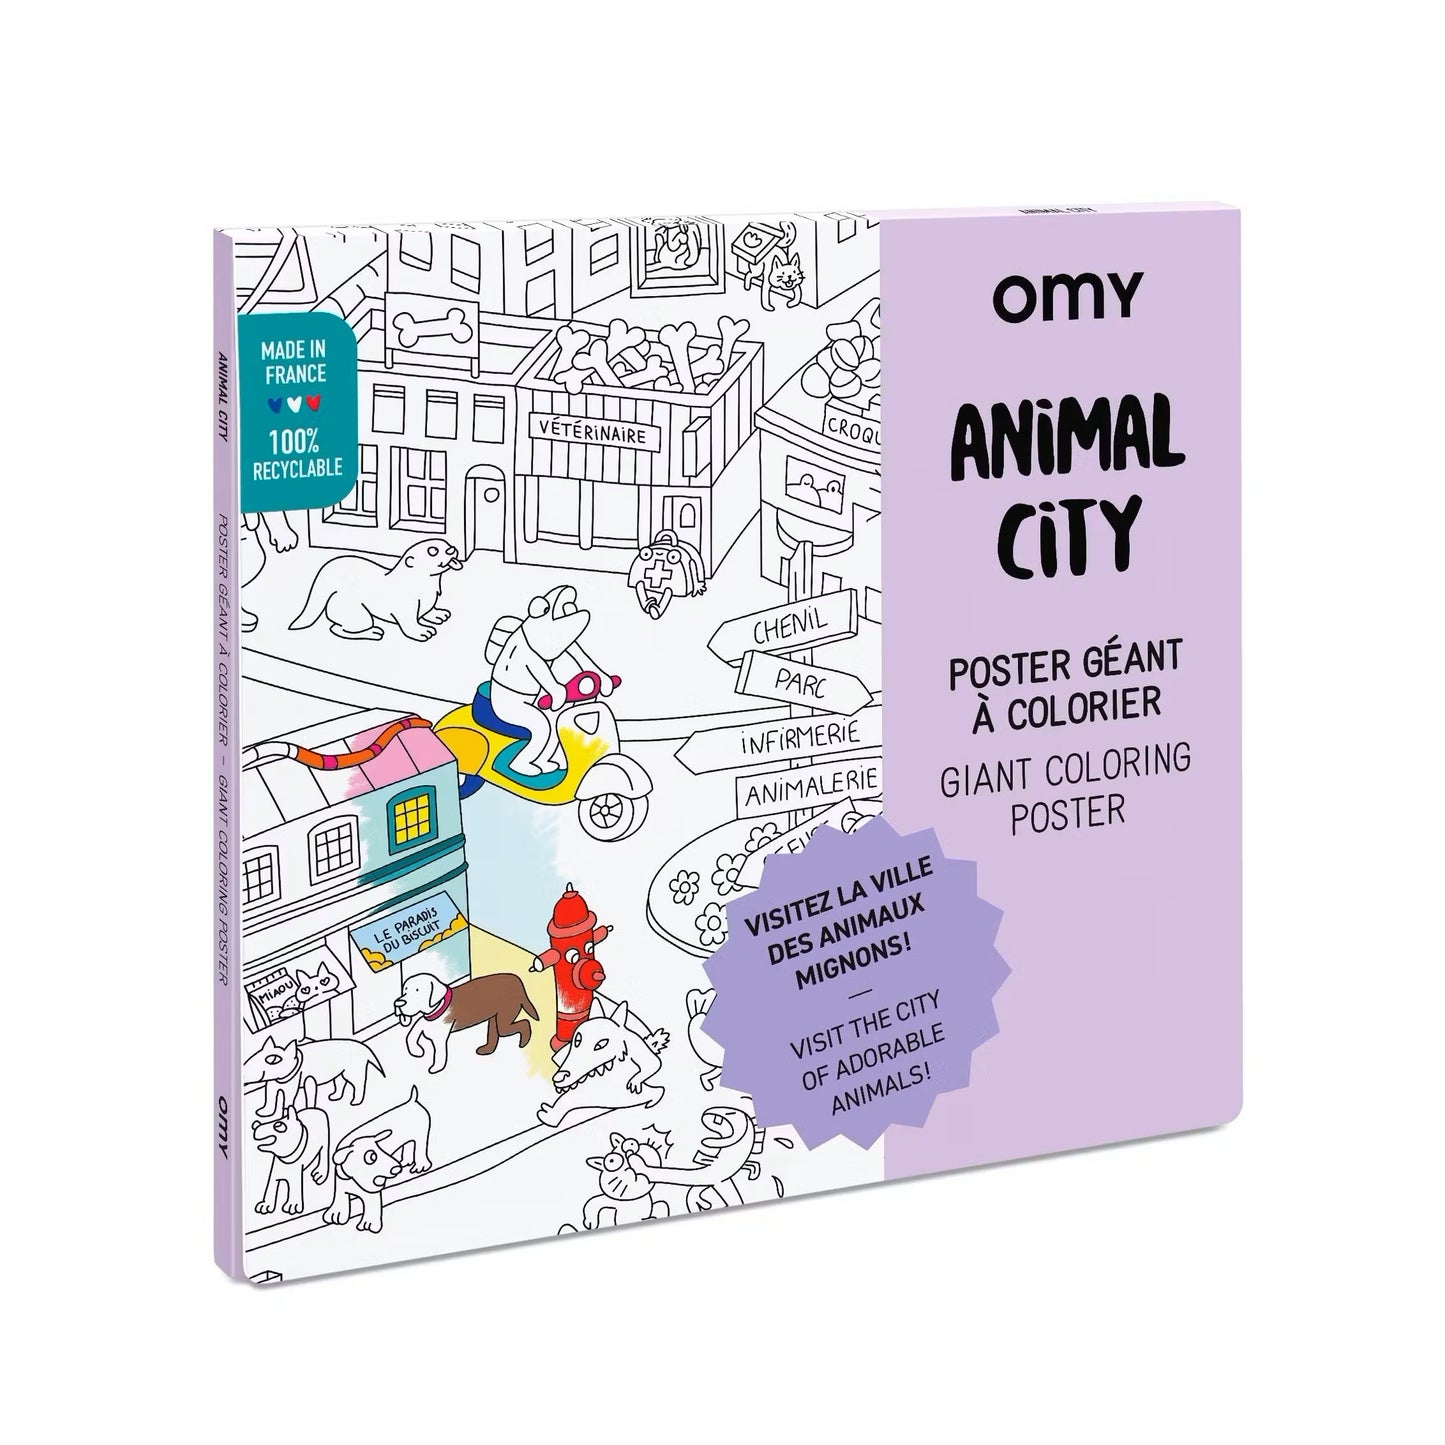 Giant coloring poster | animal city